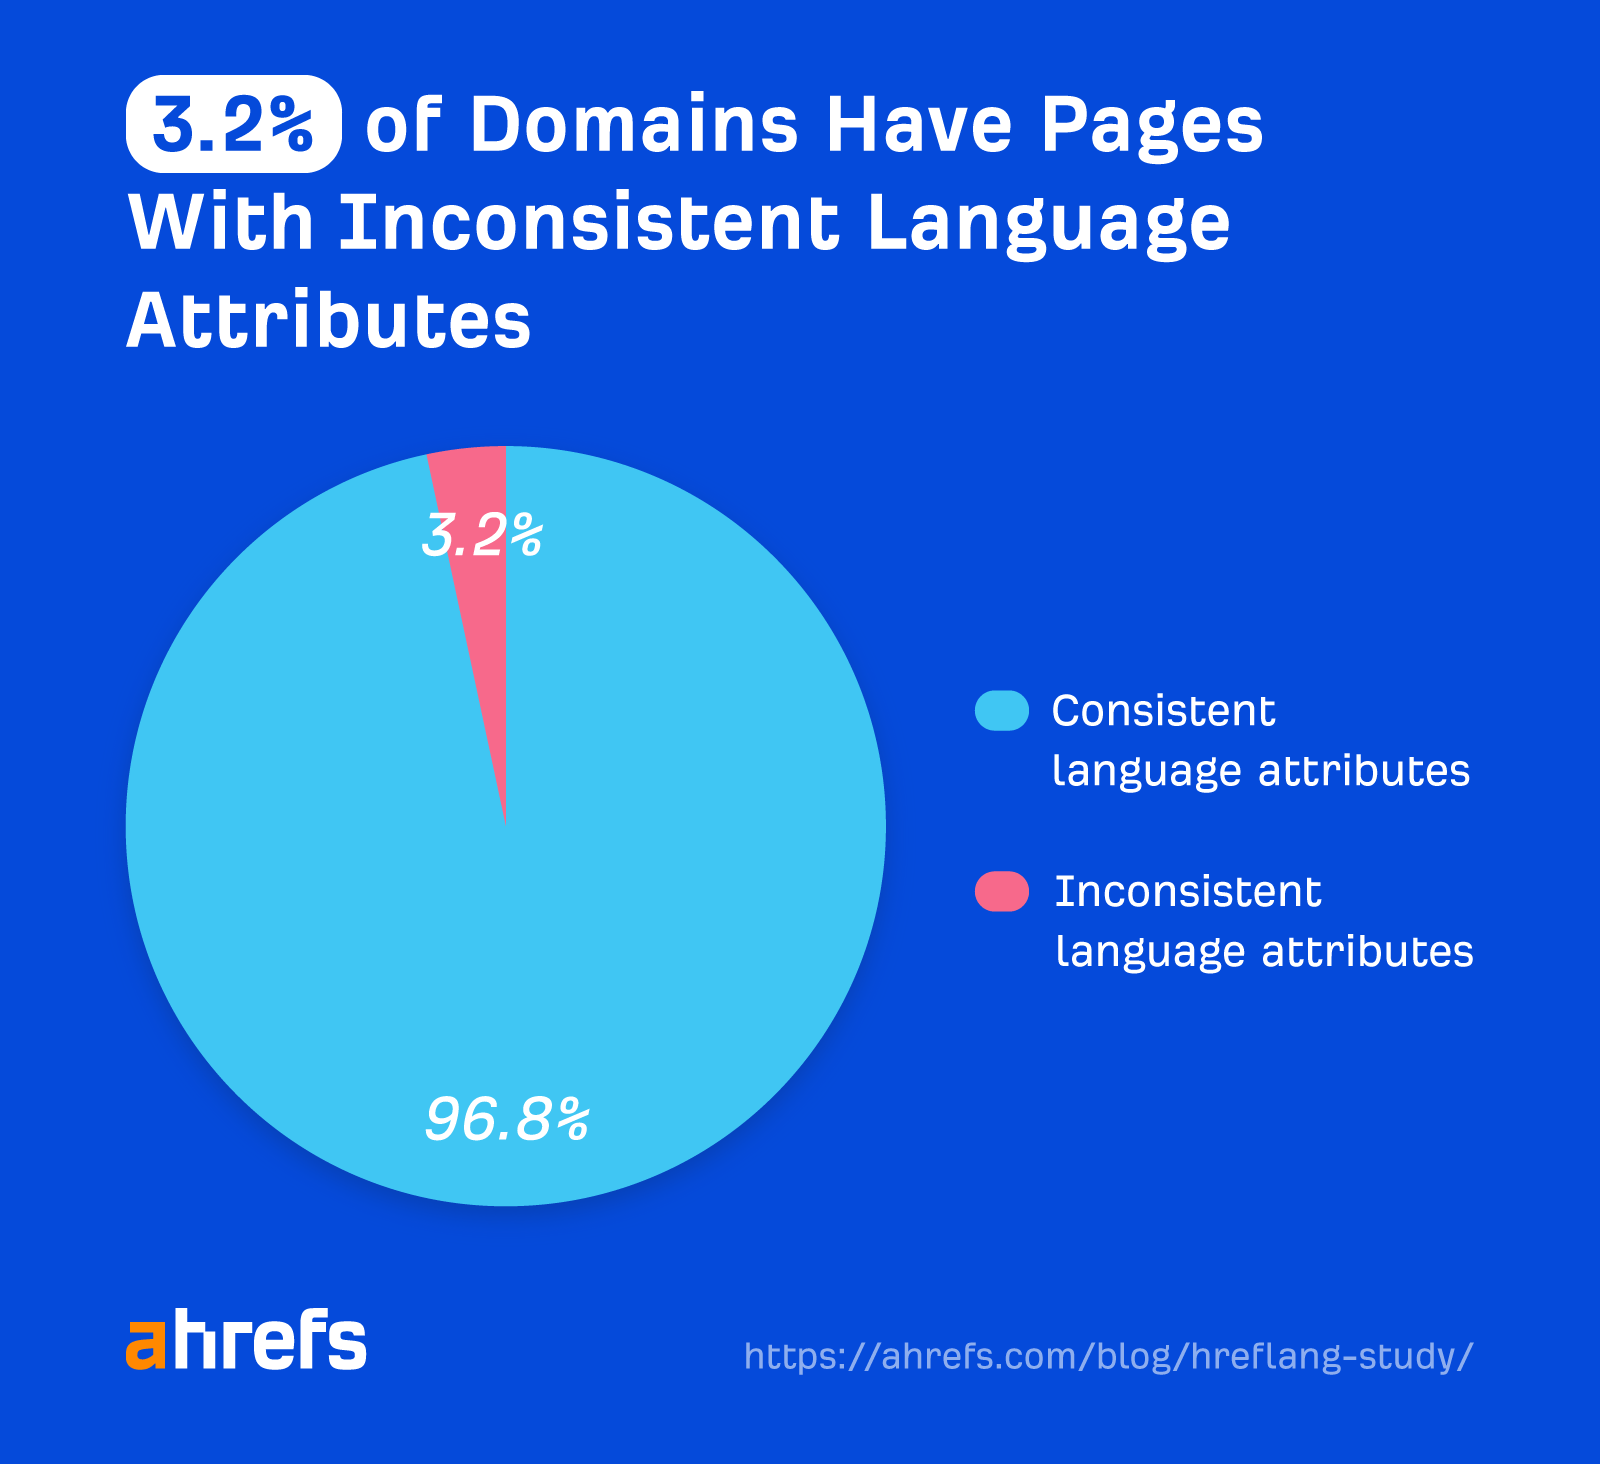 3.2% of domains have pages with inconsistent language attributes